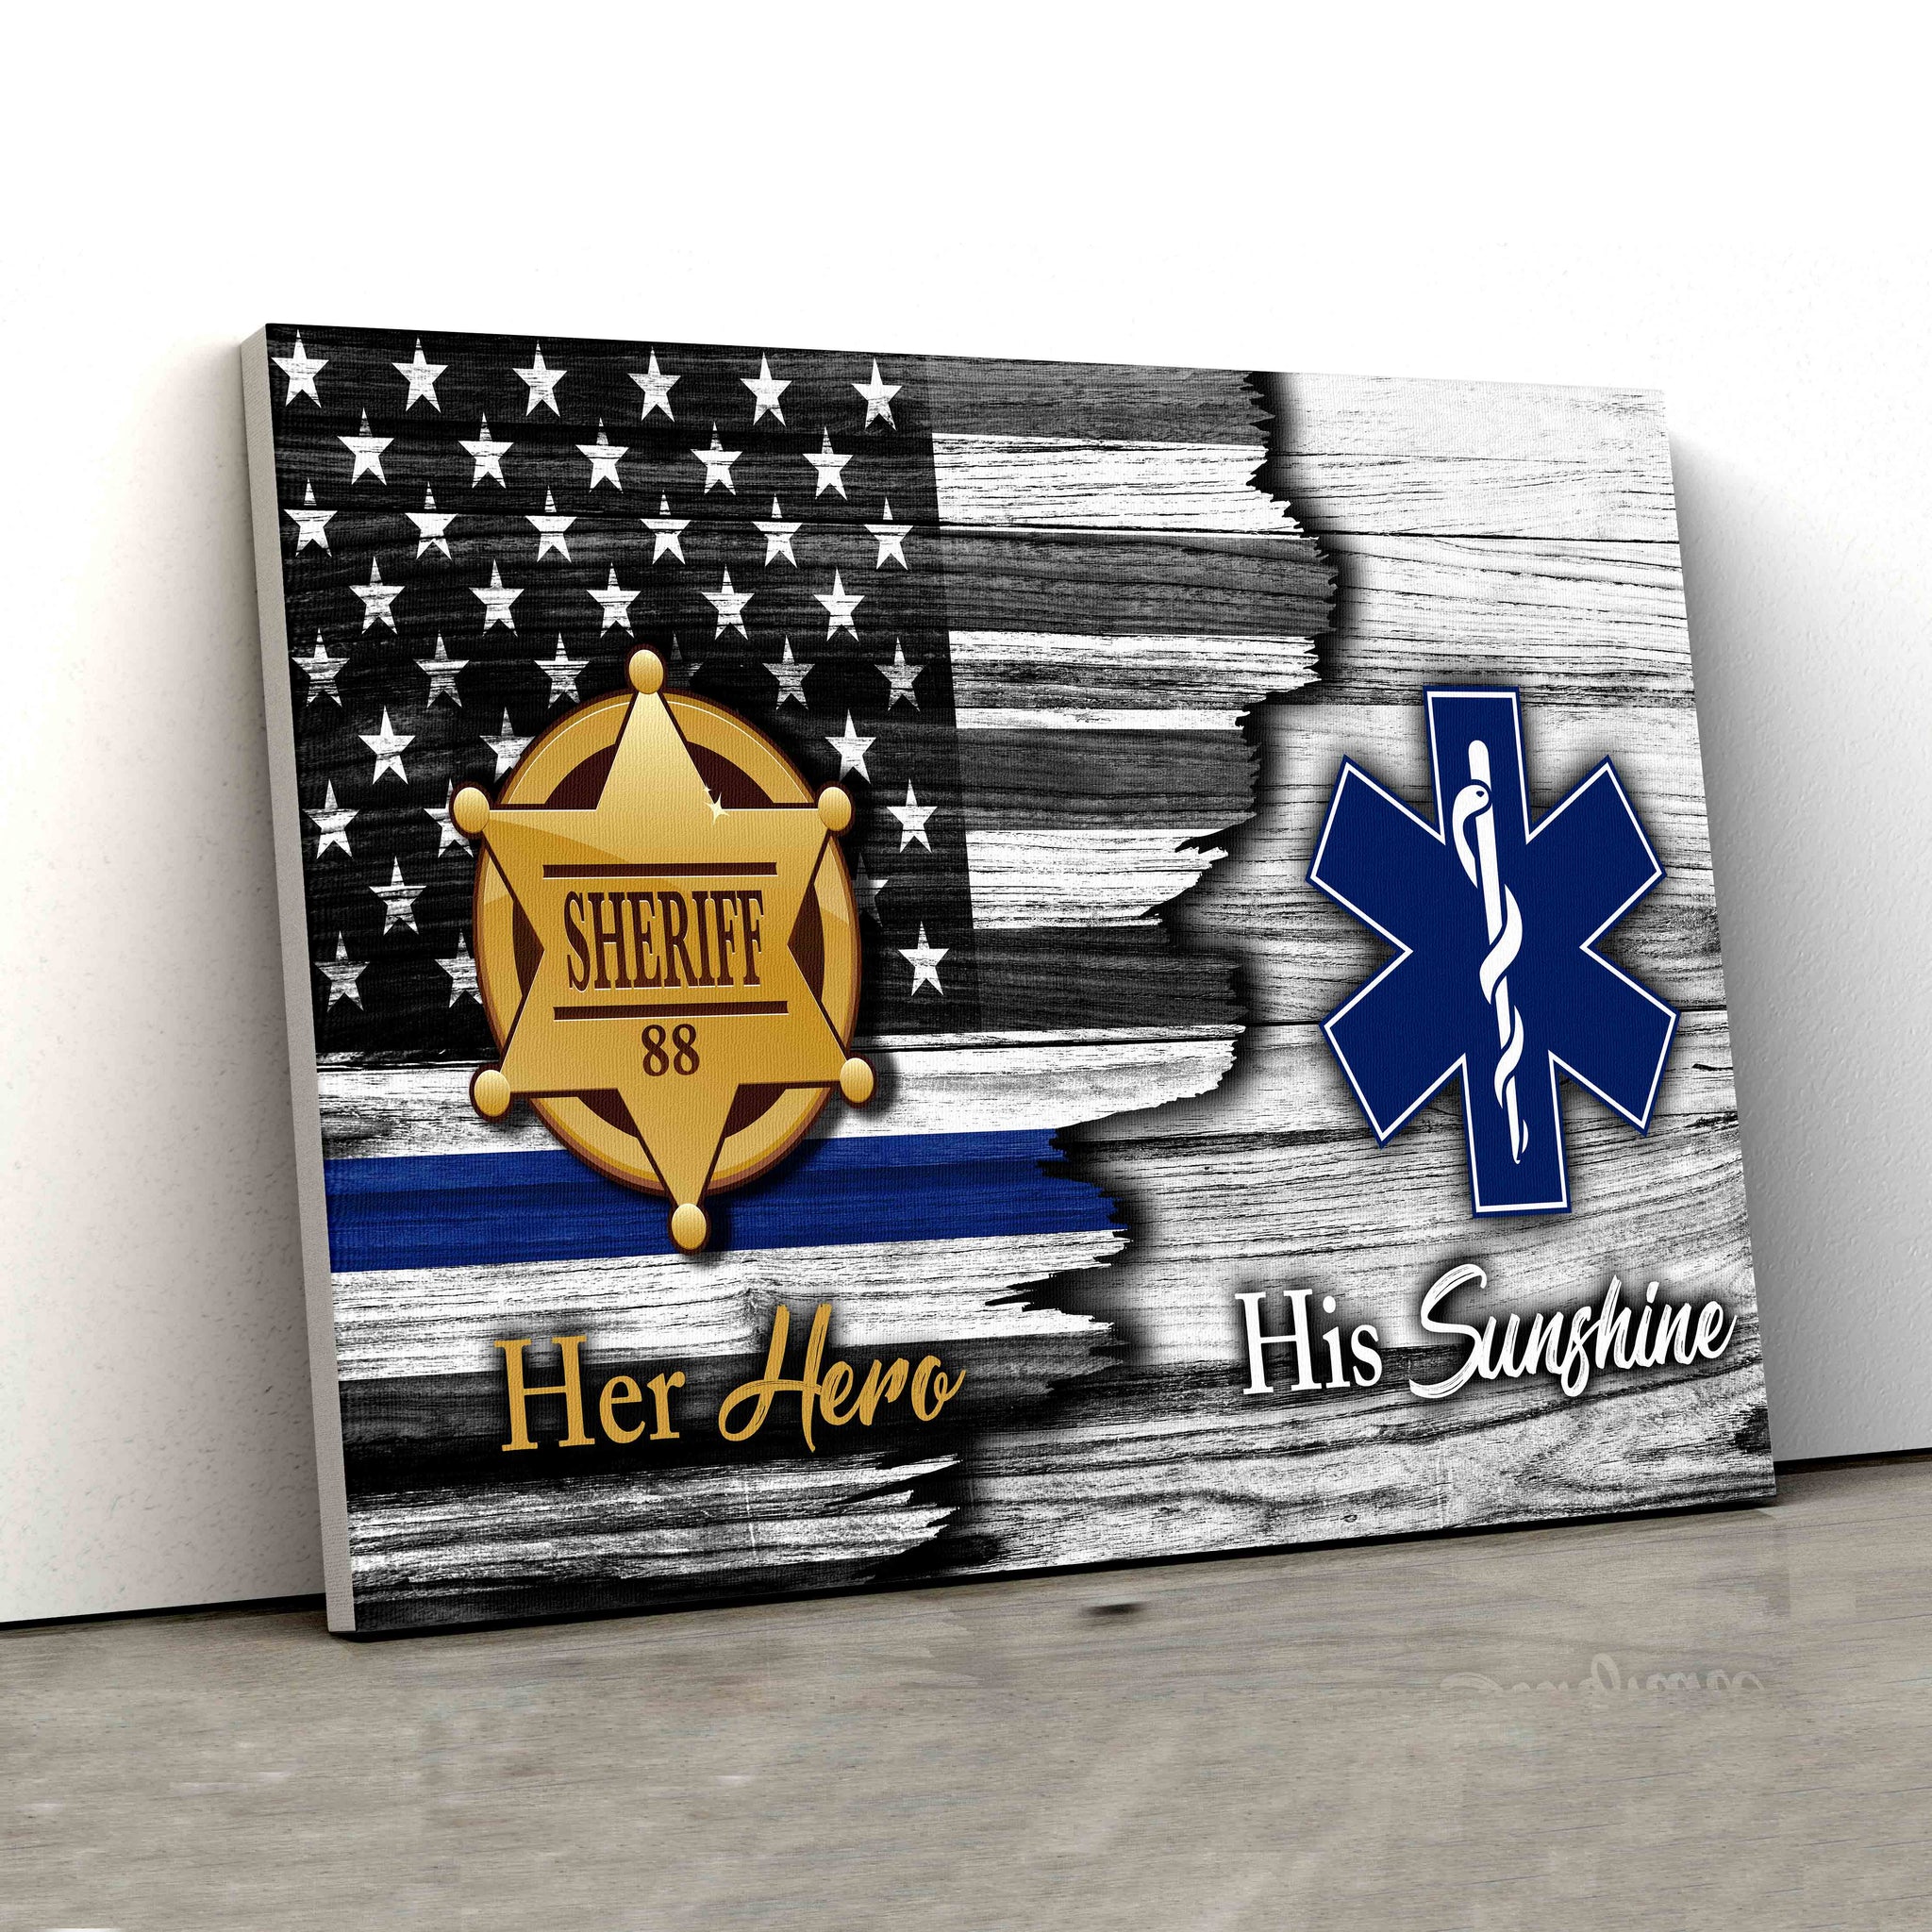 American Flag Canvas, Sheriff Badge Canvas, The Star Of Life Canvas, Custom Name Canvas, Canvas Wall Art, Gift Canvas